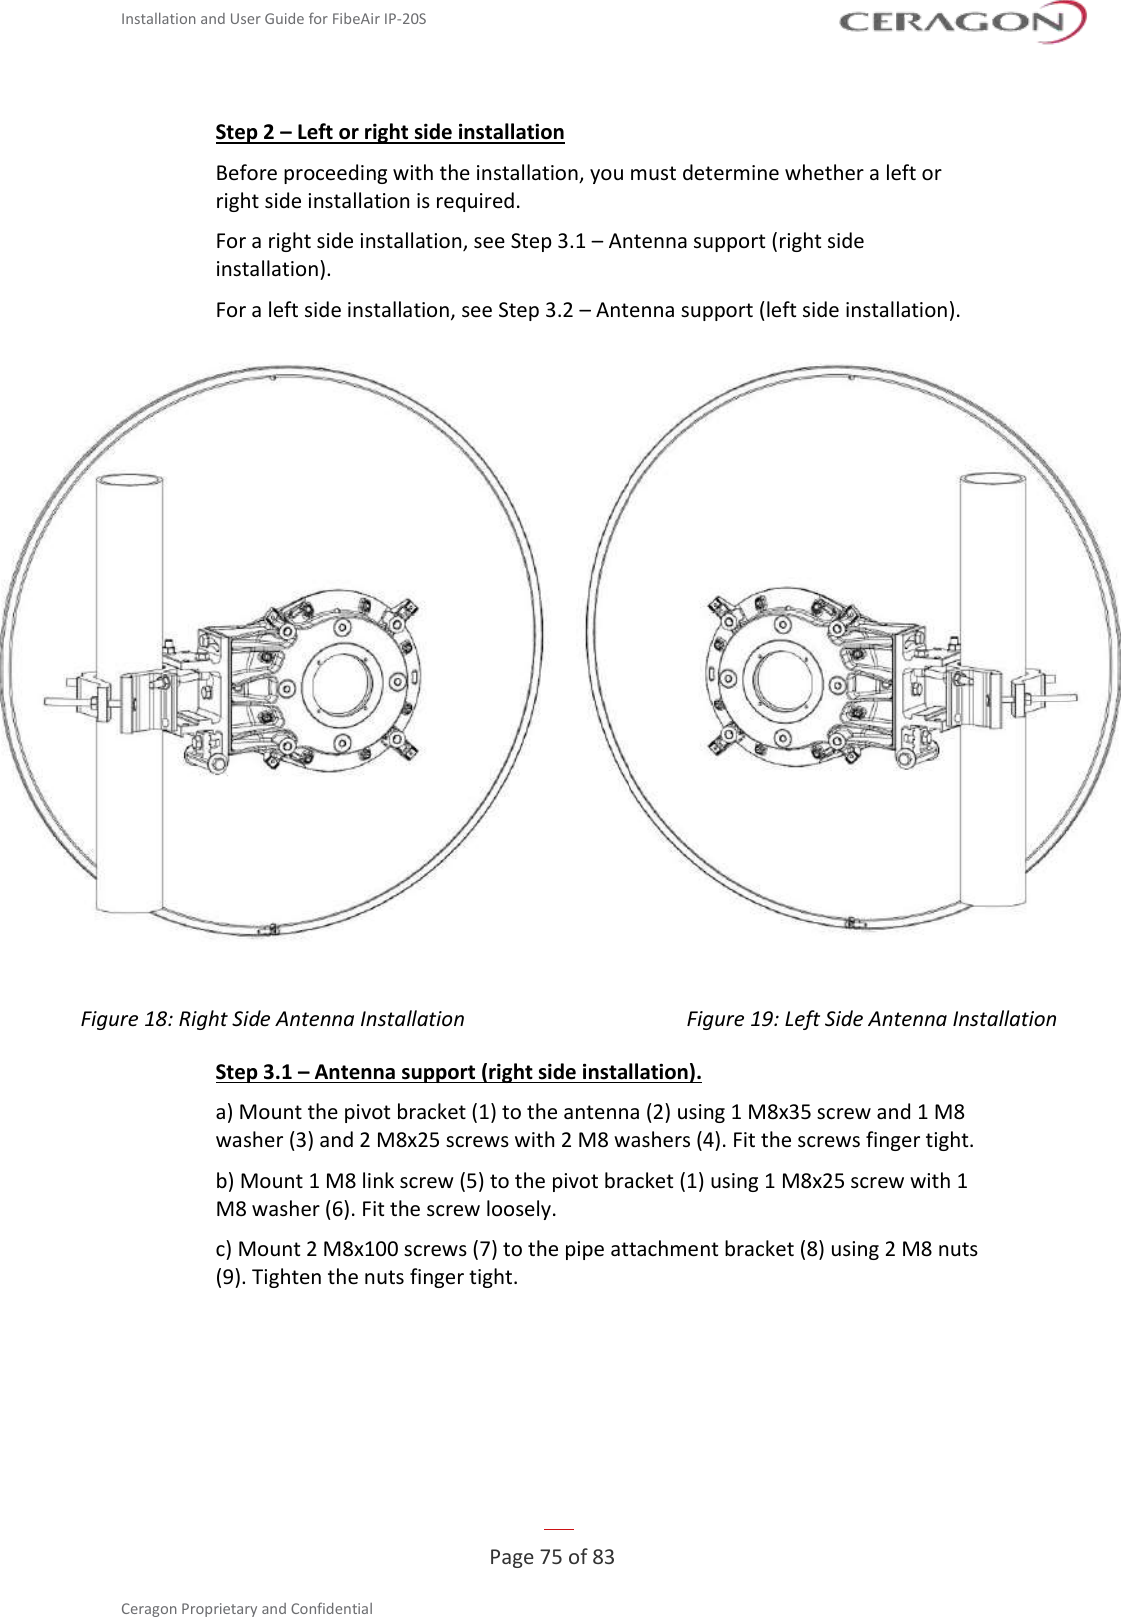 Installation and User Guide for FibeAir IP-20S   Page 75 of 83  Ceragon Proprietary and Confidential     Step 2 – Left or right side installation Before proceeding with the installation, you must determine whether a left or right side installation is required. For a right side installation, see Step 3.1 – Antenna support (right side installation). For a left side installation, see Step 3.2 – Antenna support (left side installation).   Figure 18: Right Side Antenna Installation Figure 19: Left Side Antenna Installation Step 3.1 – Antenna support (right side installation). a) Mount the pivot bracket (1) to the antenna (2) using 1 M8x35 screw and 1 M8 washer (3) and 2 M8x25 screws with 2 M8 washers (4). Fit the screws finger tight. b) Mount 1 M8 link screw (5) to the pivot bracket (1) using 1 M8x25 screw with 1 M8 washer (6). Fit the screw loosely. c) Mount 2 M8x100 screws (7) to the pipe attachment bracket (8) using 2 M8 nuts (9). Tighten the nuts finger tight. 